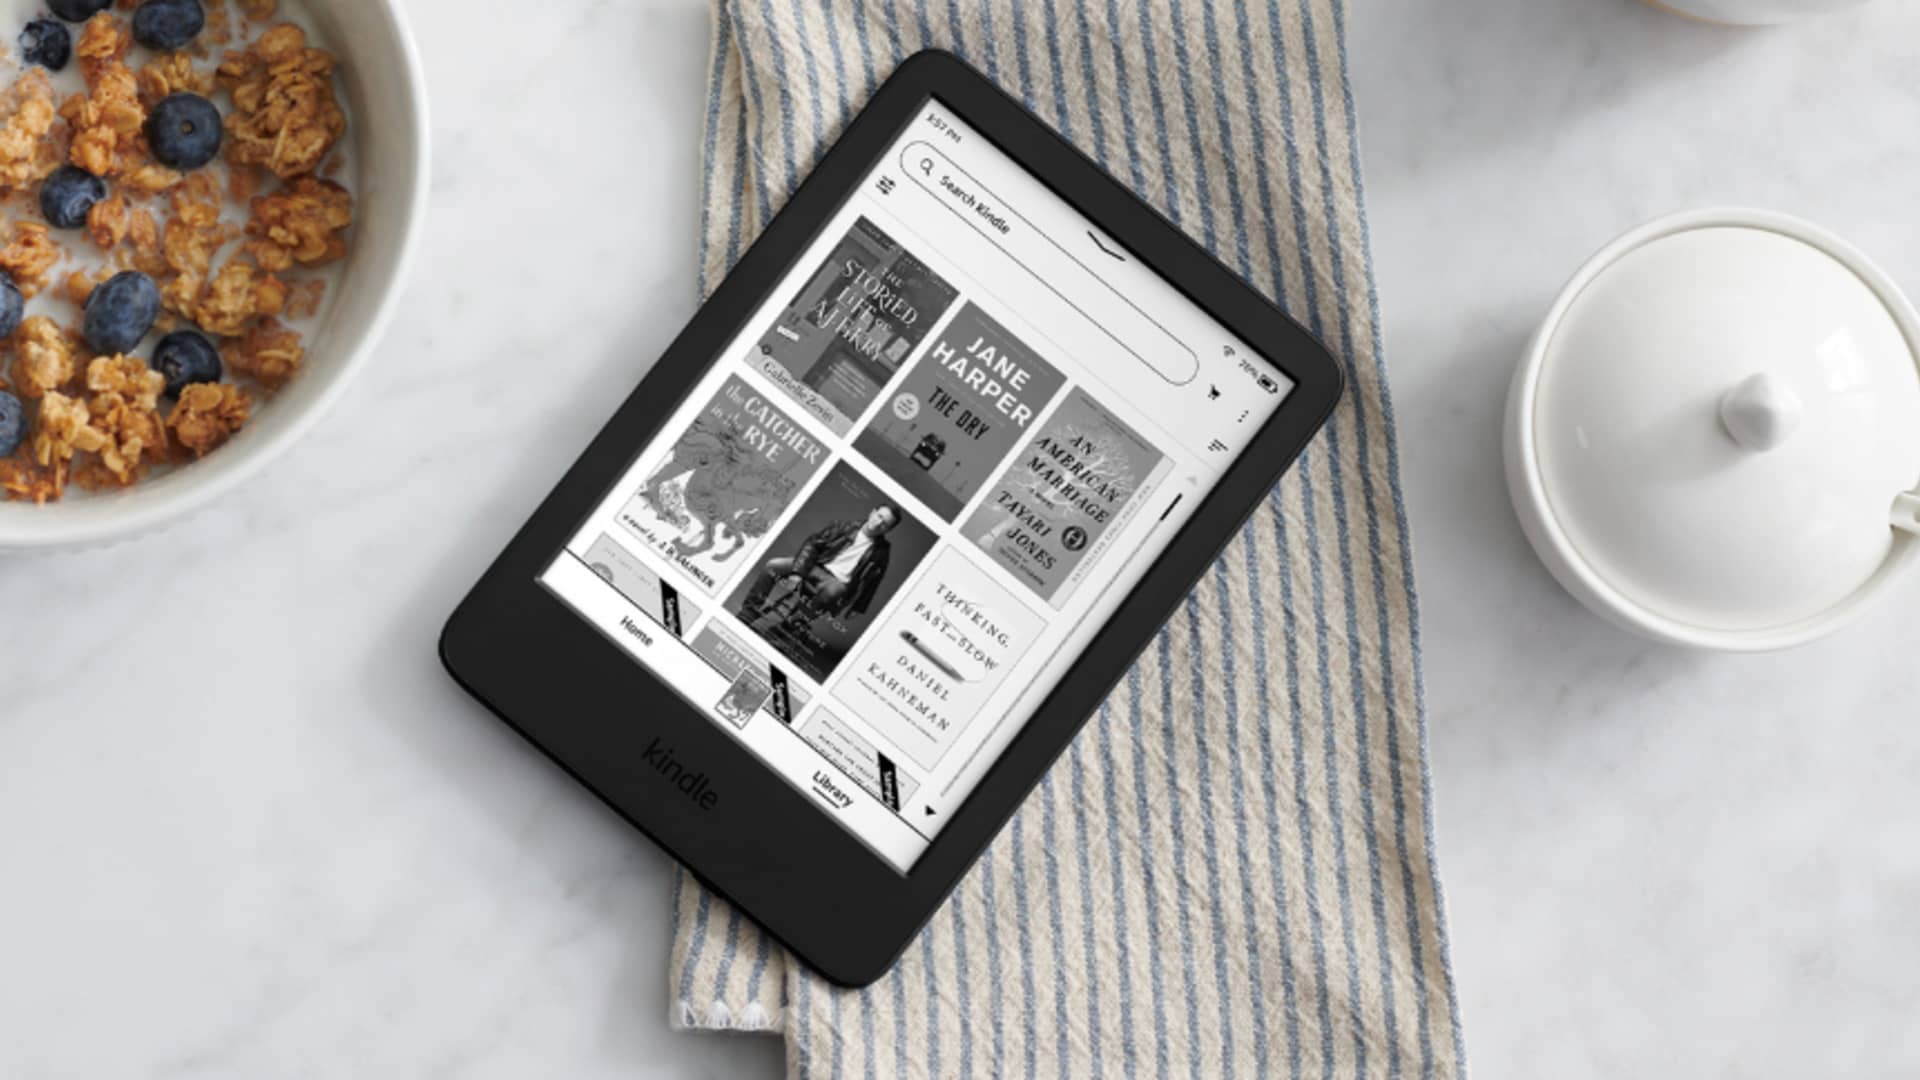 Amazon Kindle 2022 announced for $99 with USB-C, better screen